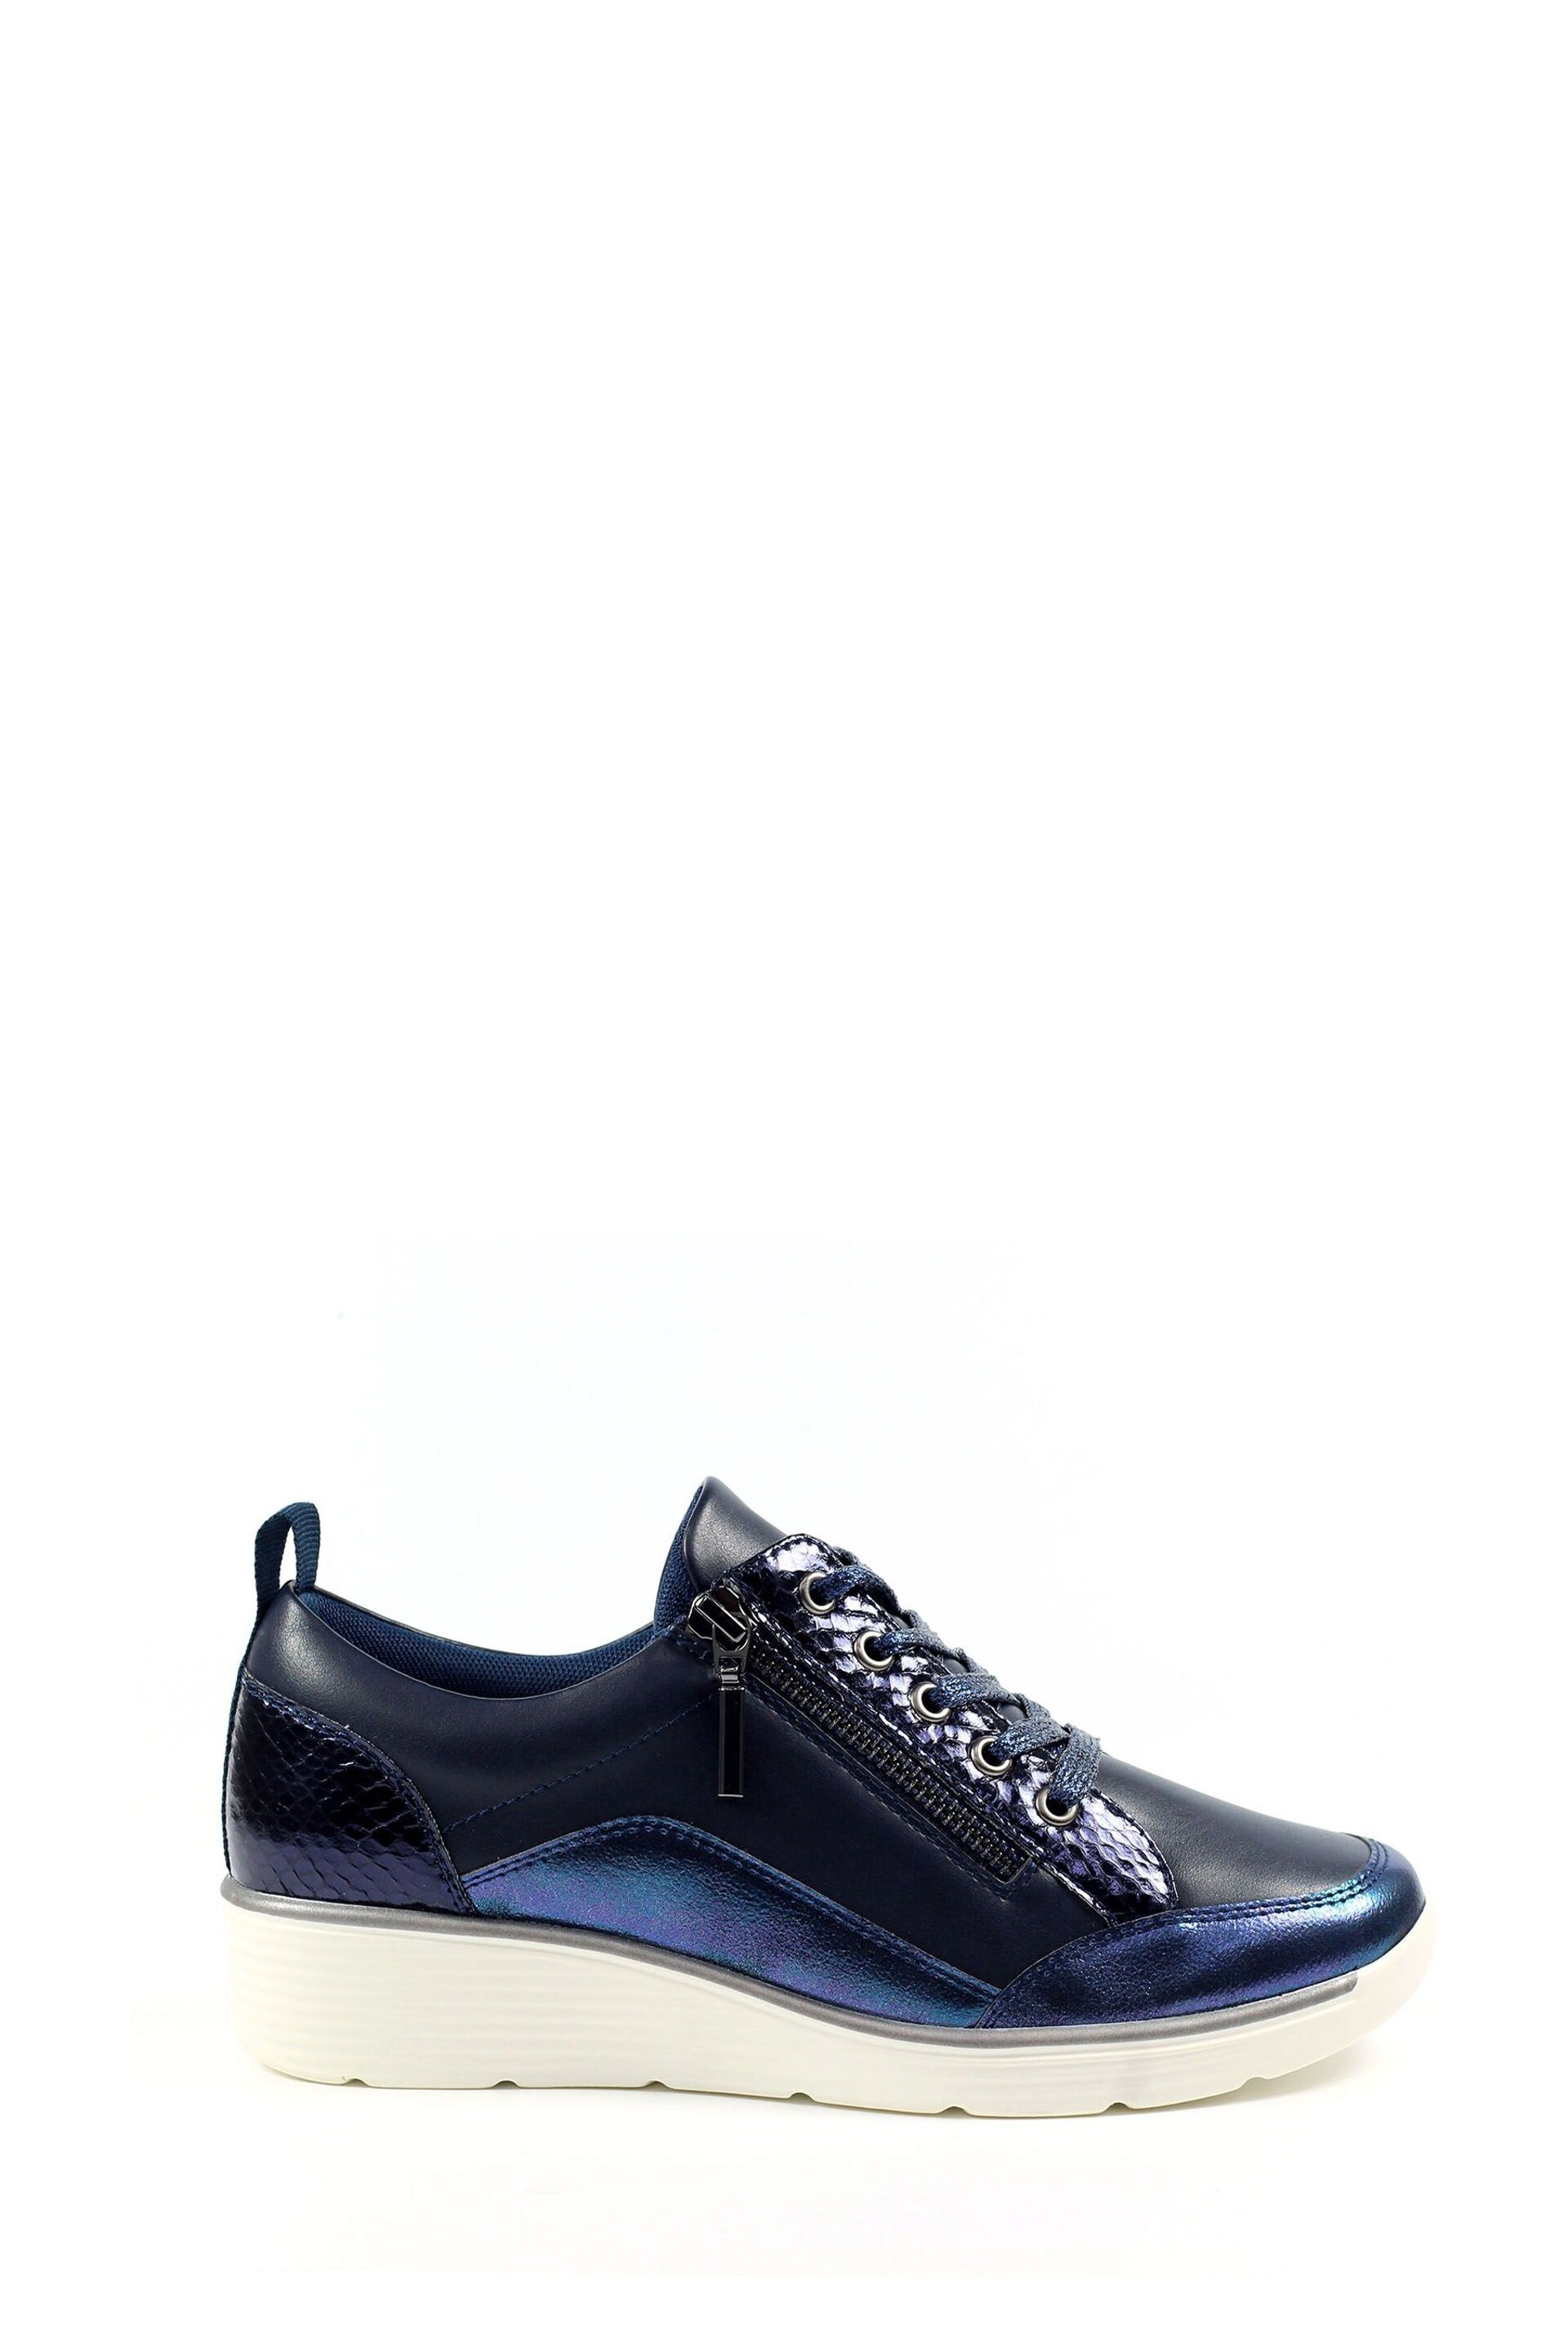 Lunar Navy Blue Kiley Trainers - Image 2 of 8